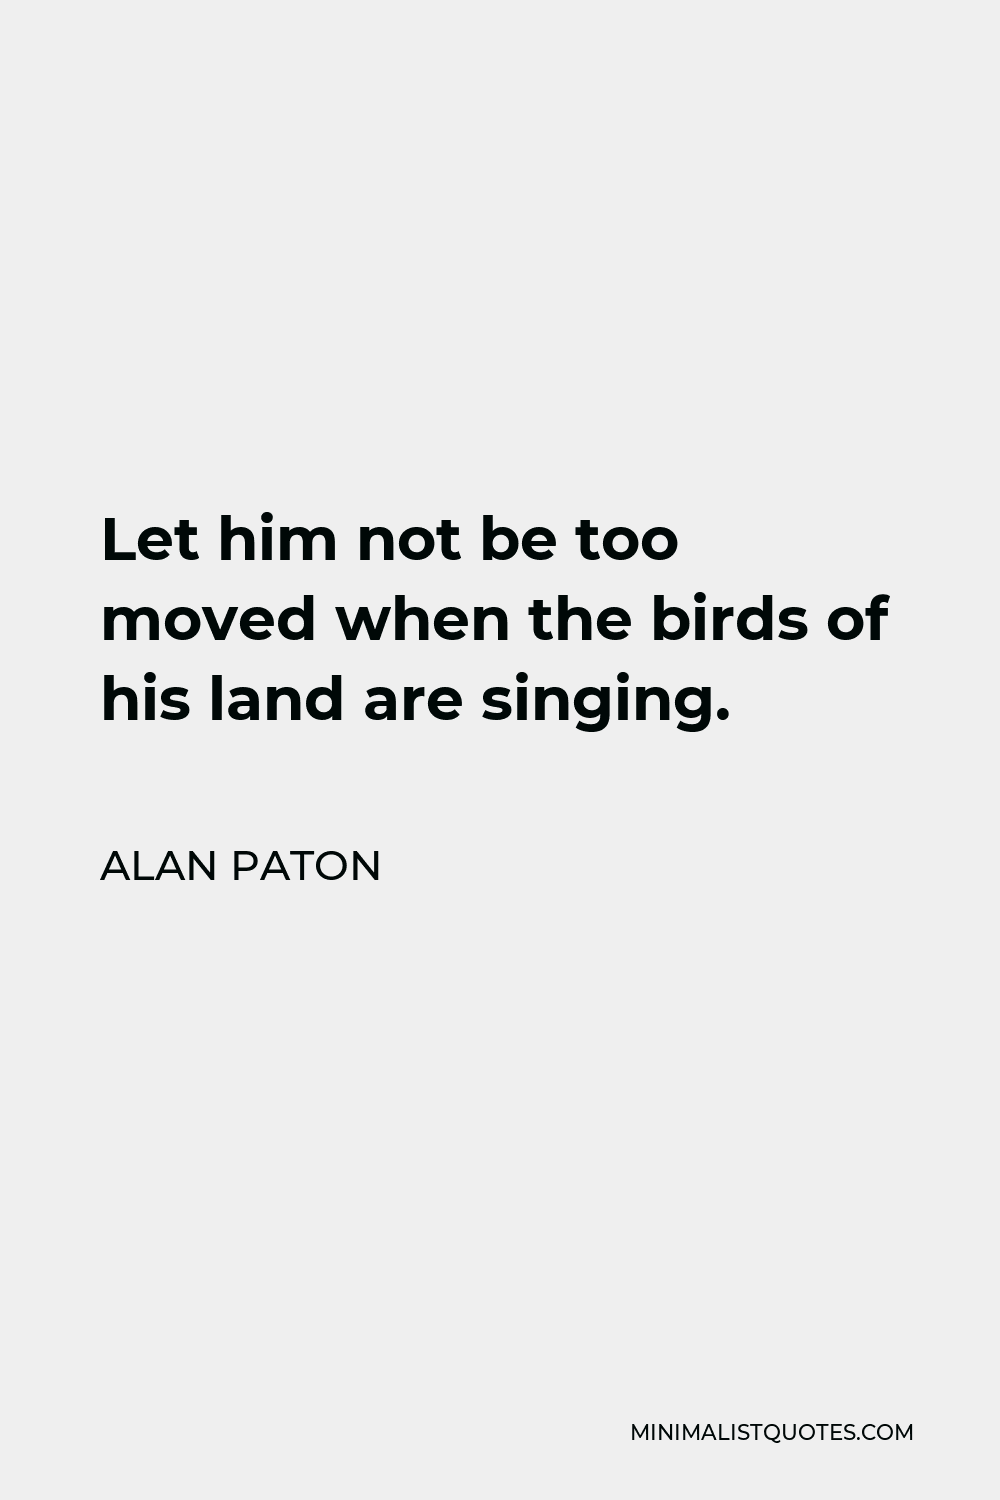 Alan Paton Quote - Let him not be too moved when the birds of his land are singing.